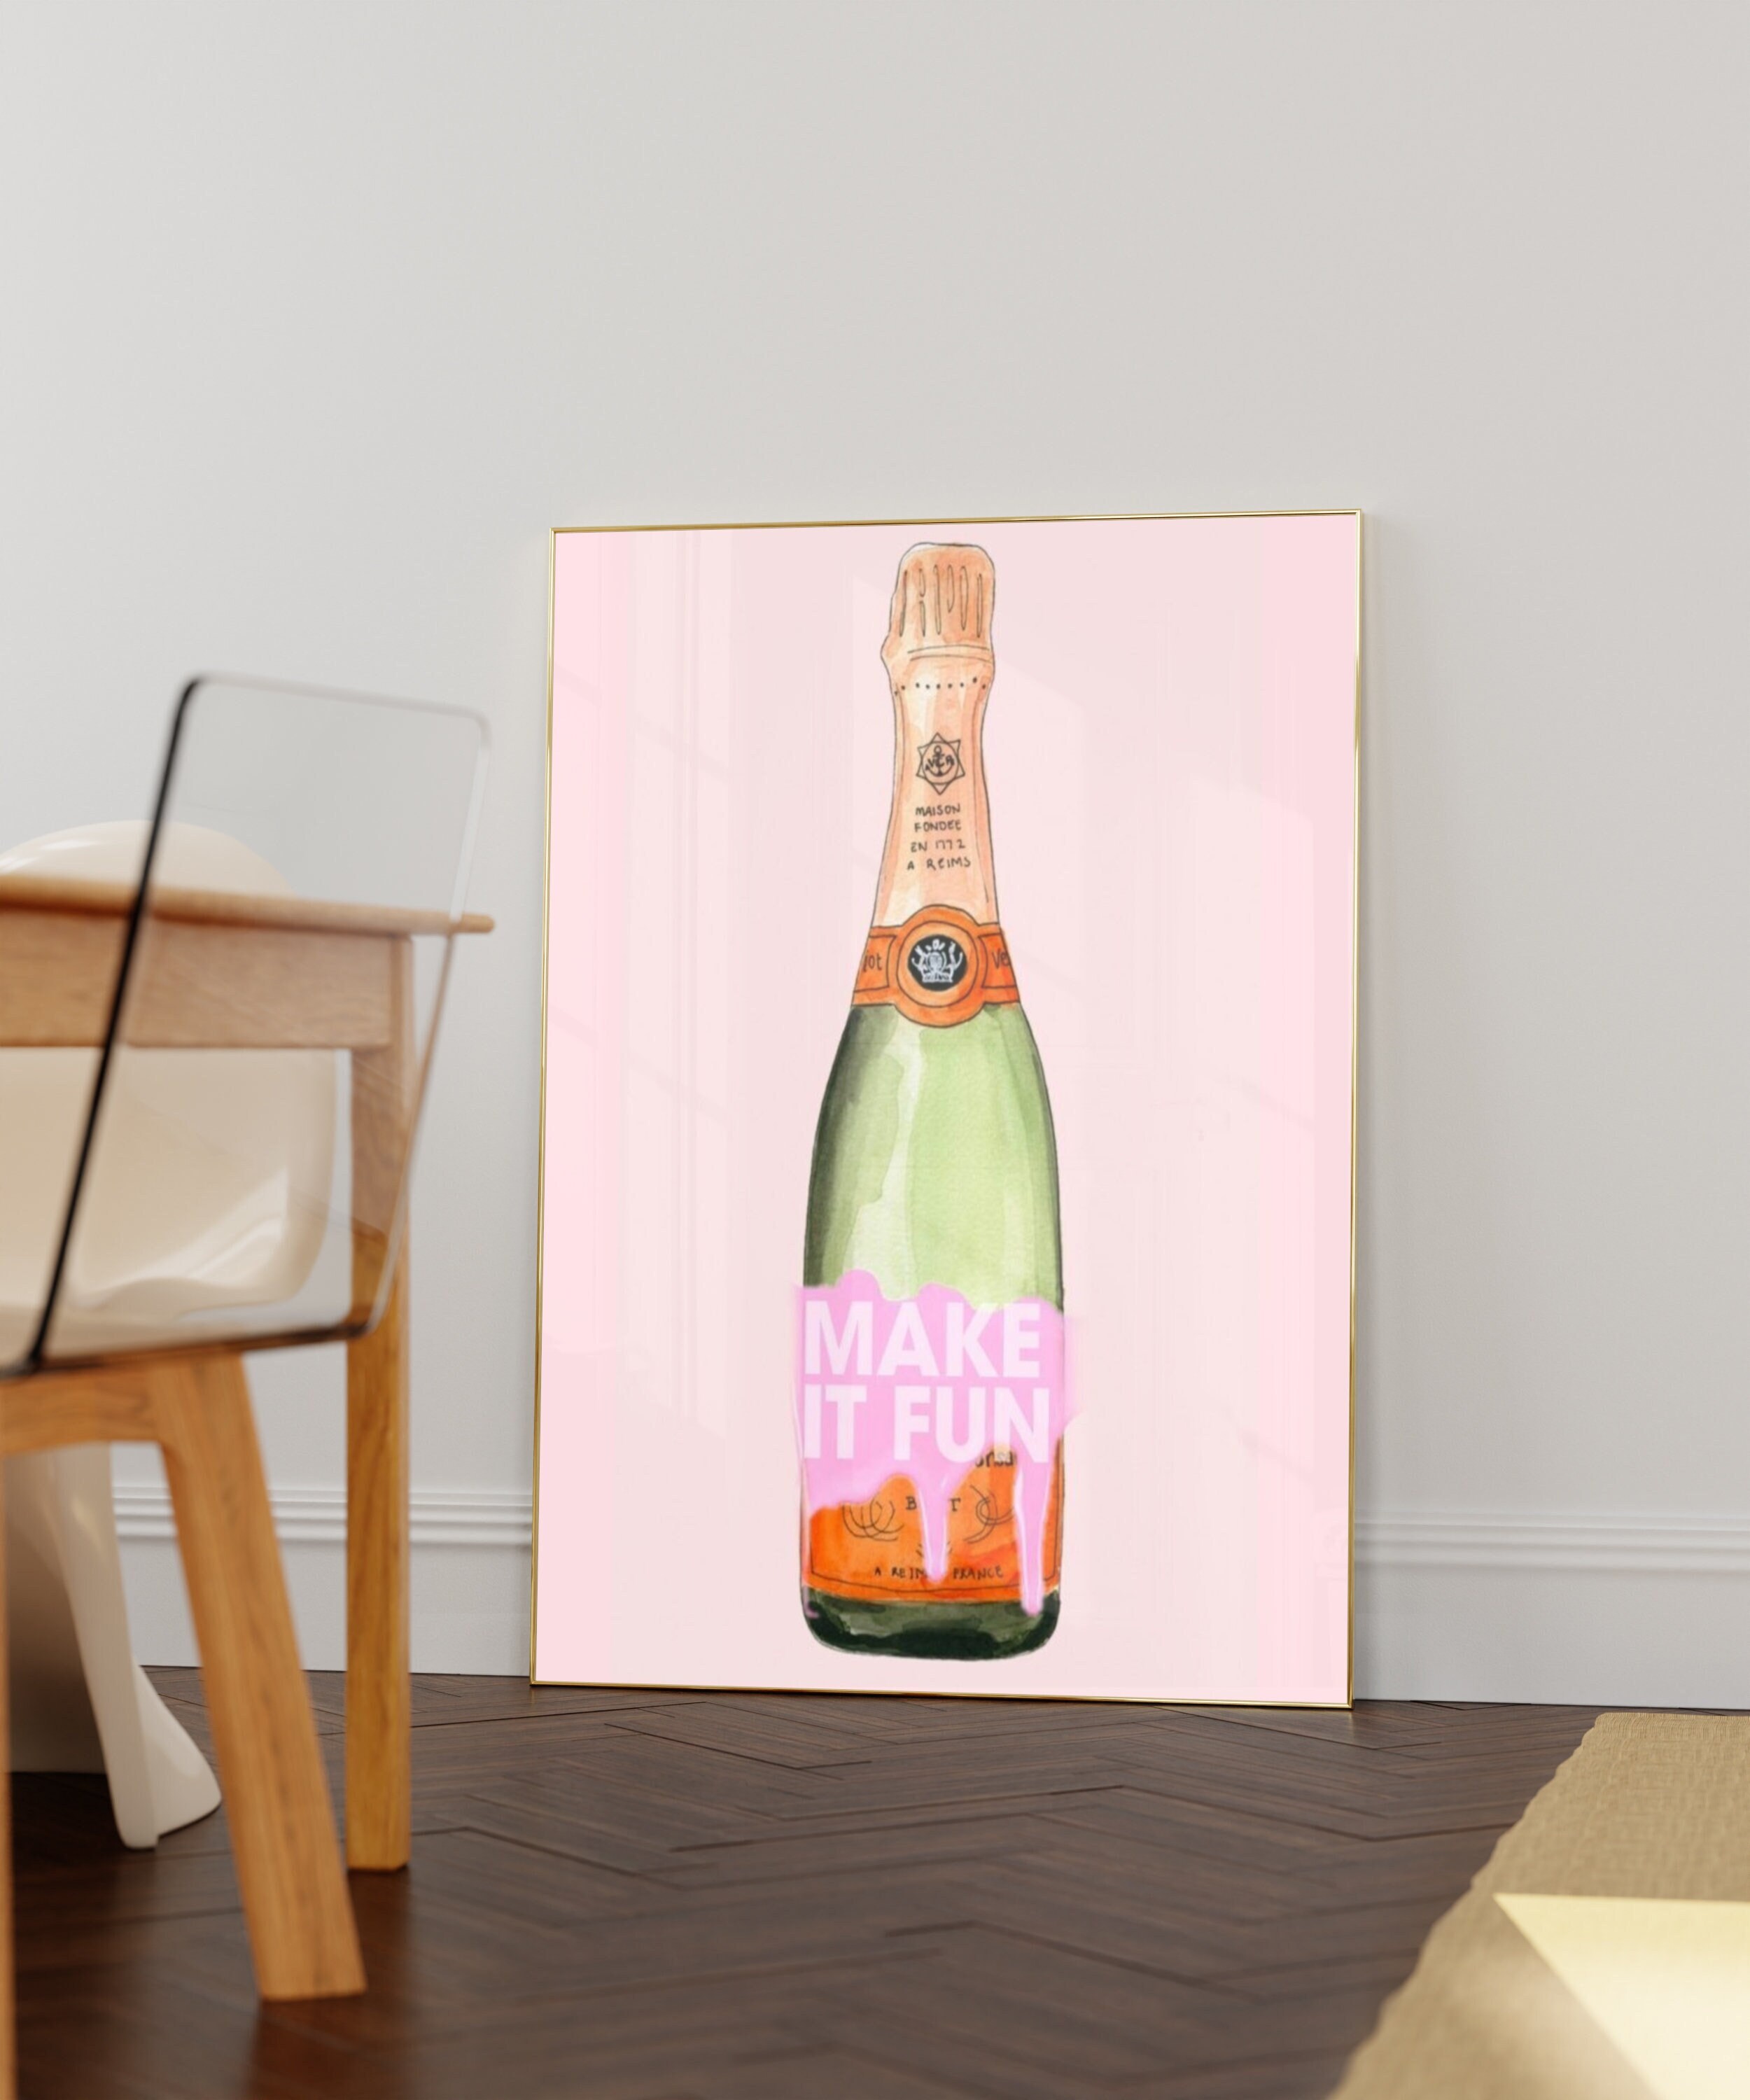 Orchid Champagne Illustrated Wall Art Print – Cute Salute